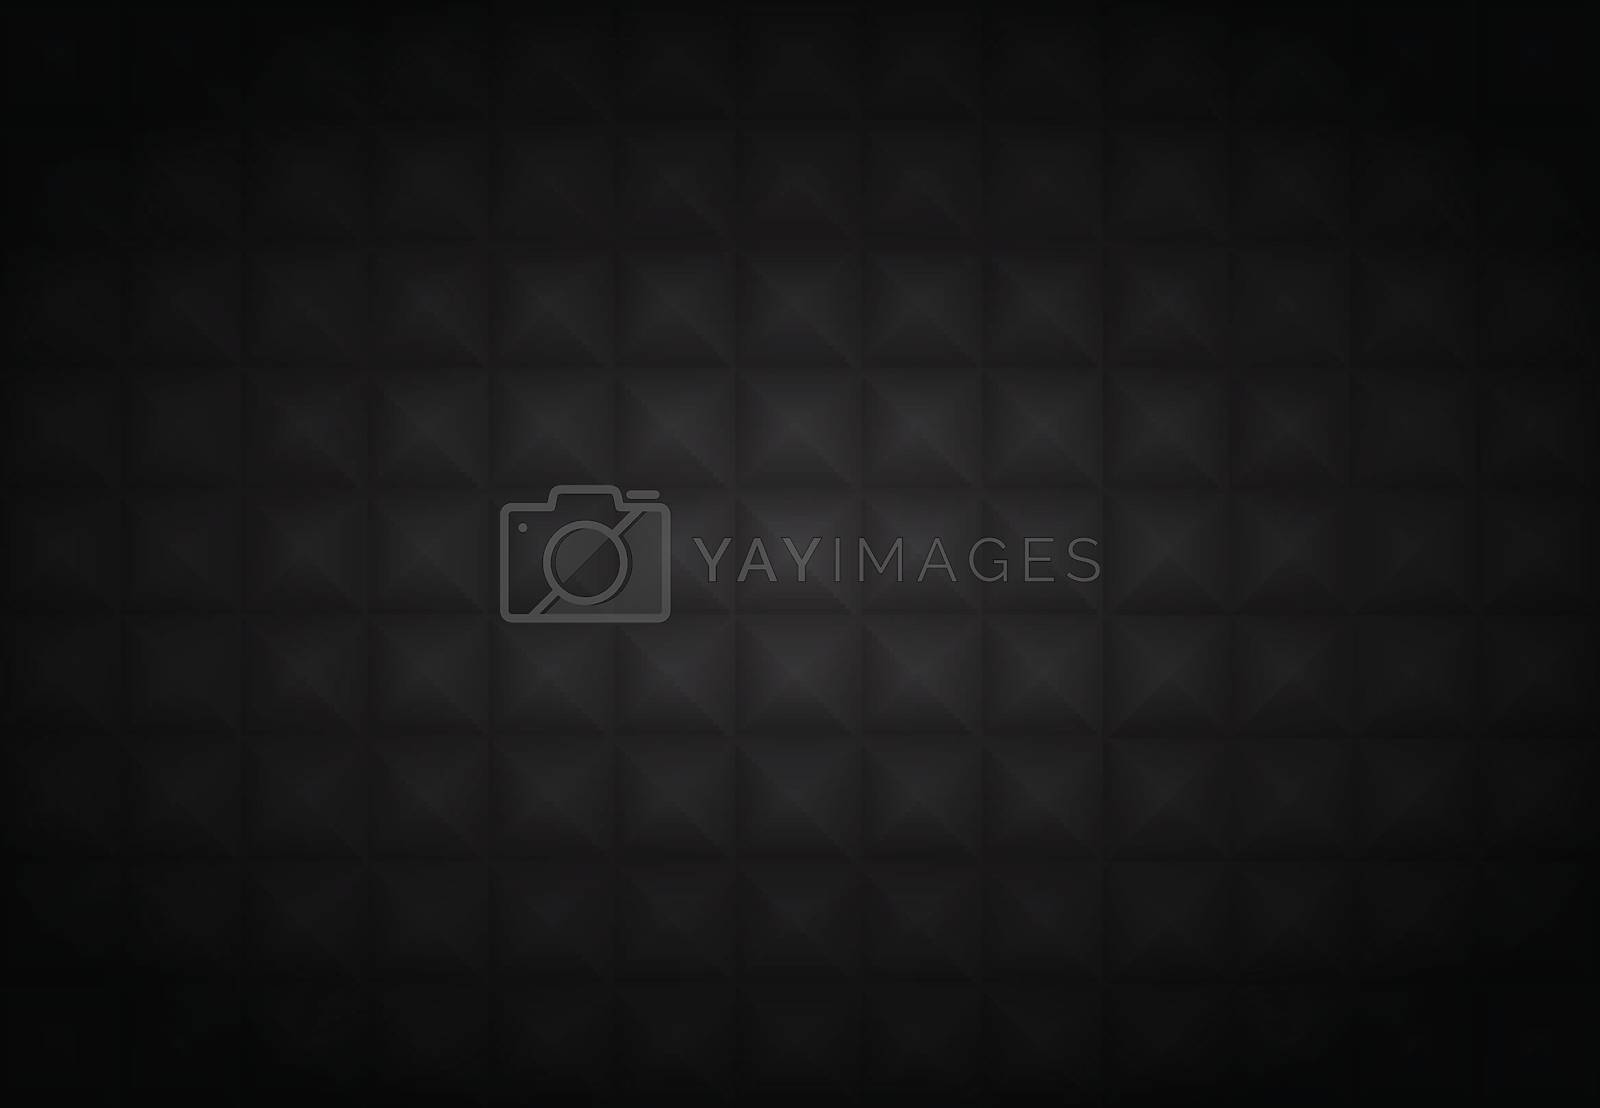 Royalty free image of Abstract 3D black geometric polygon pattern on dark backgrund. by phochi